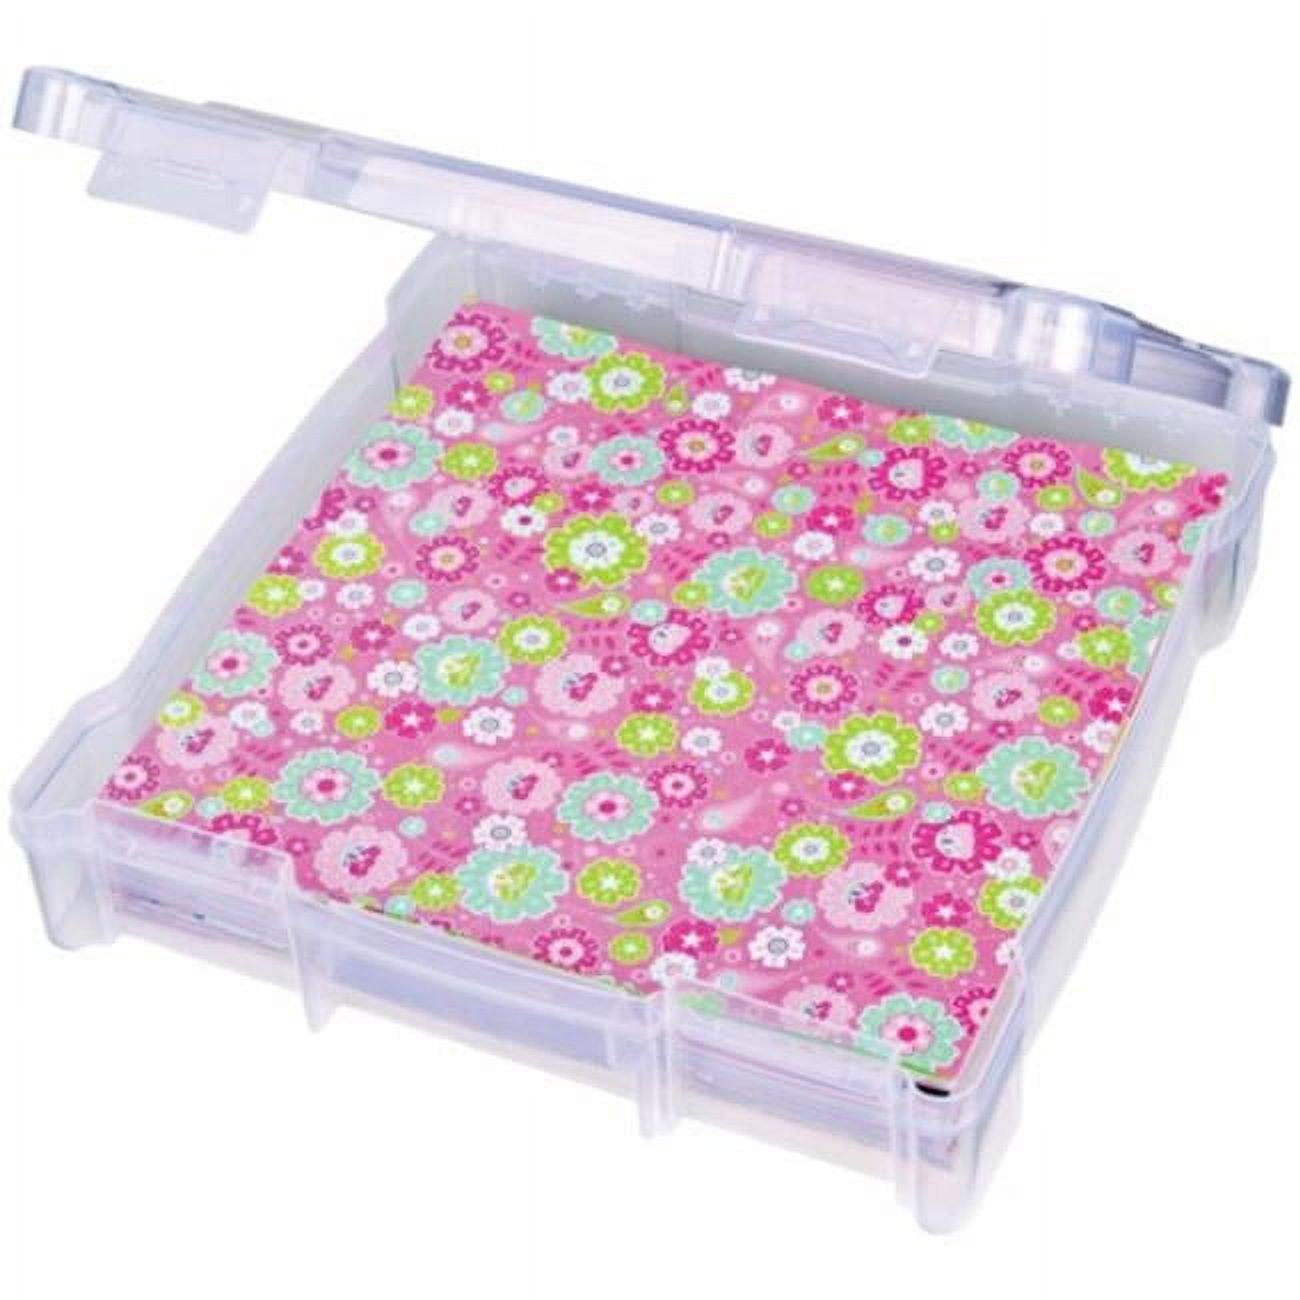 Yirtree 3-Layer Things & Crafts Storage Box with 18 Adjustable Compartments for Organizing Washi Tape, Embroidery Accessories, Threads Bobbins, Kids